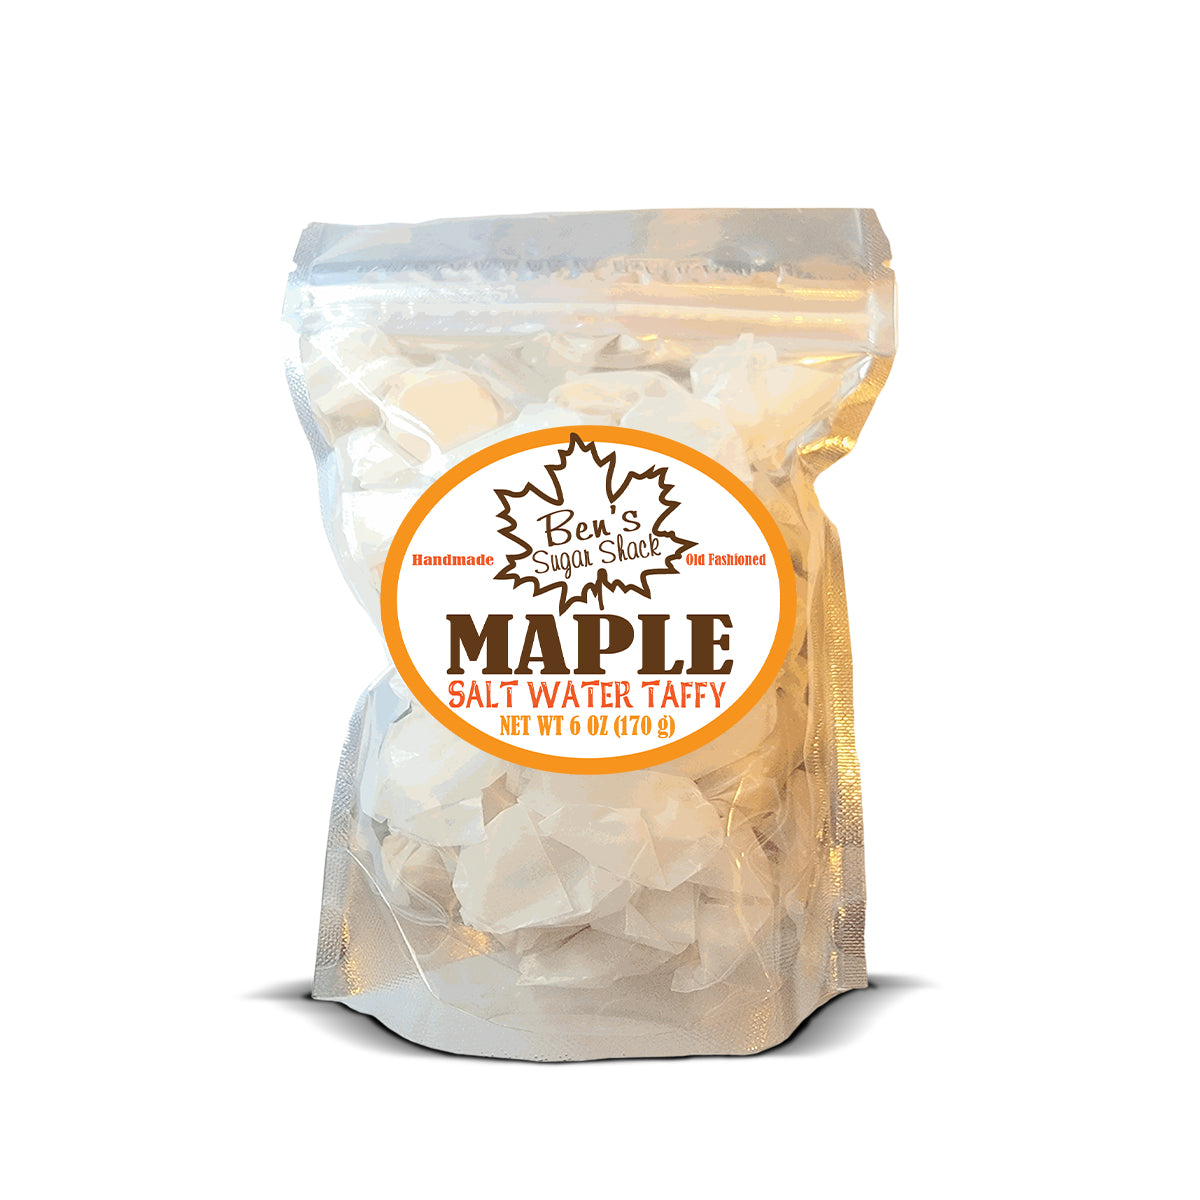 Maple Cotton Candy - Bens Sugar Shack – Bens Maple Syrup